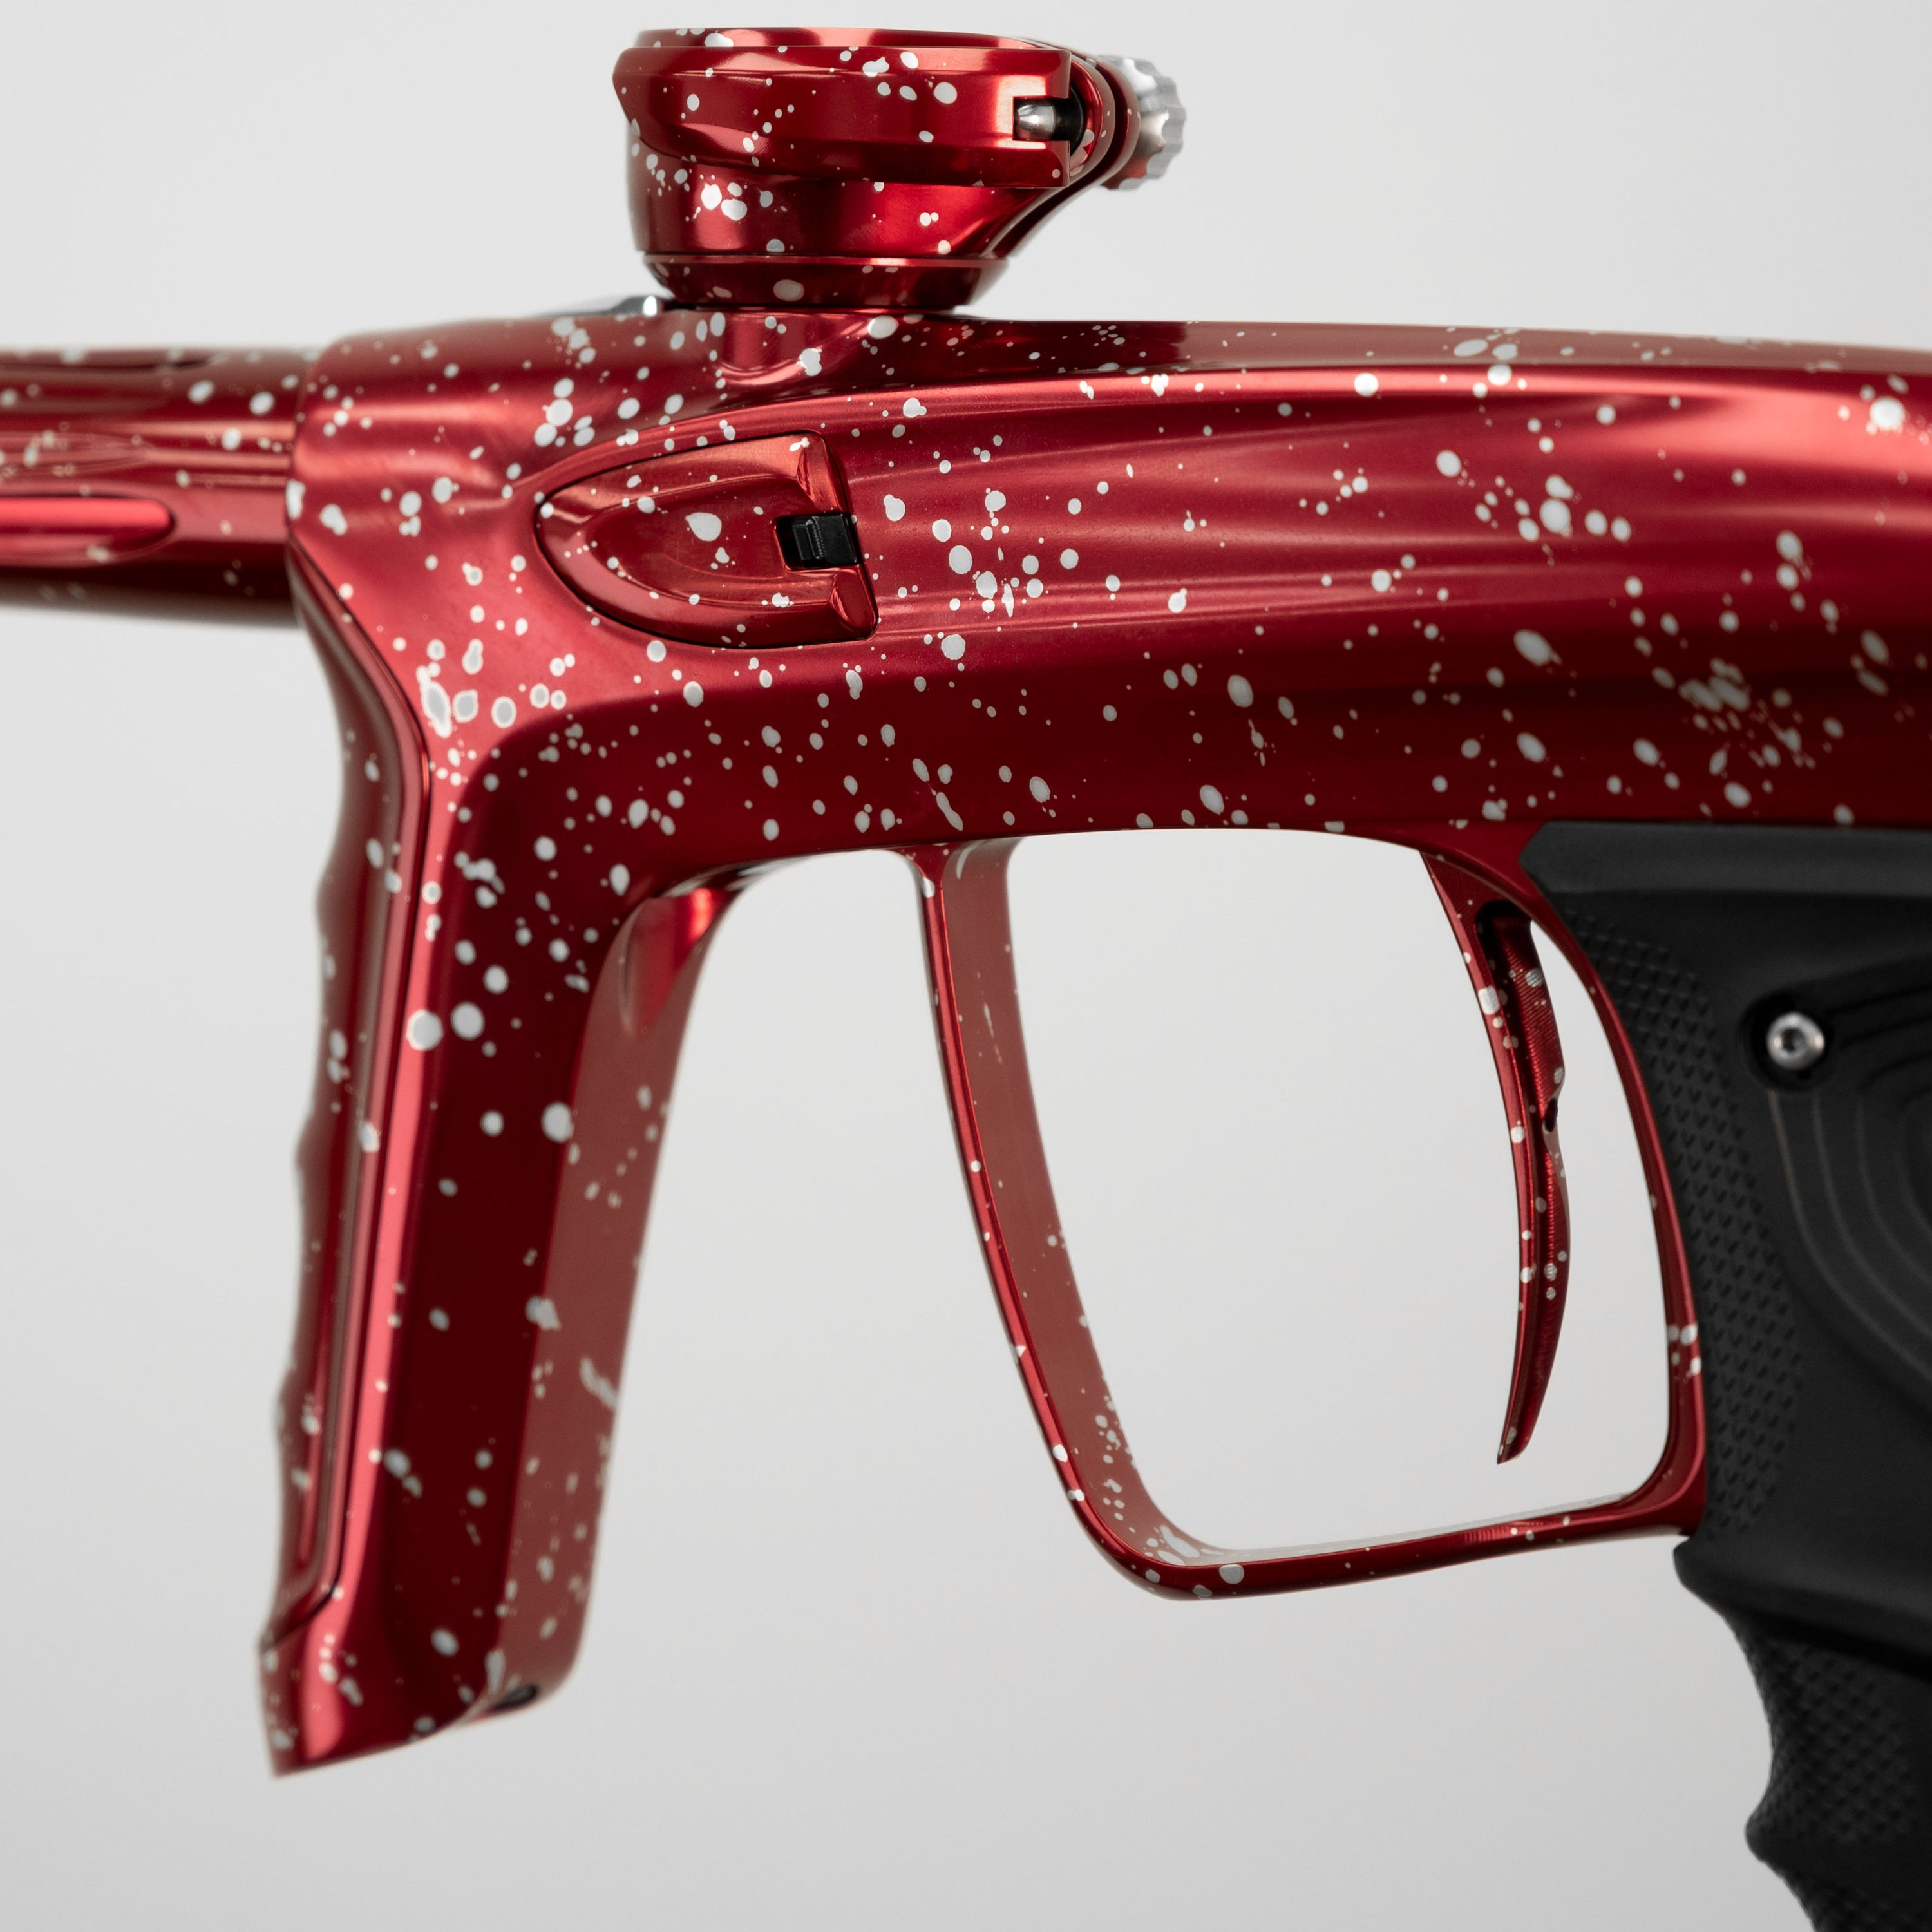 DLX Luxe TM40 Paintball Gun - LE Dr. Speckle (Gloss Red / Silver Speckle)